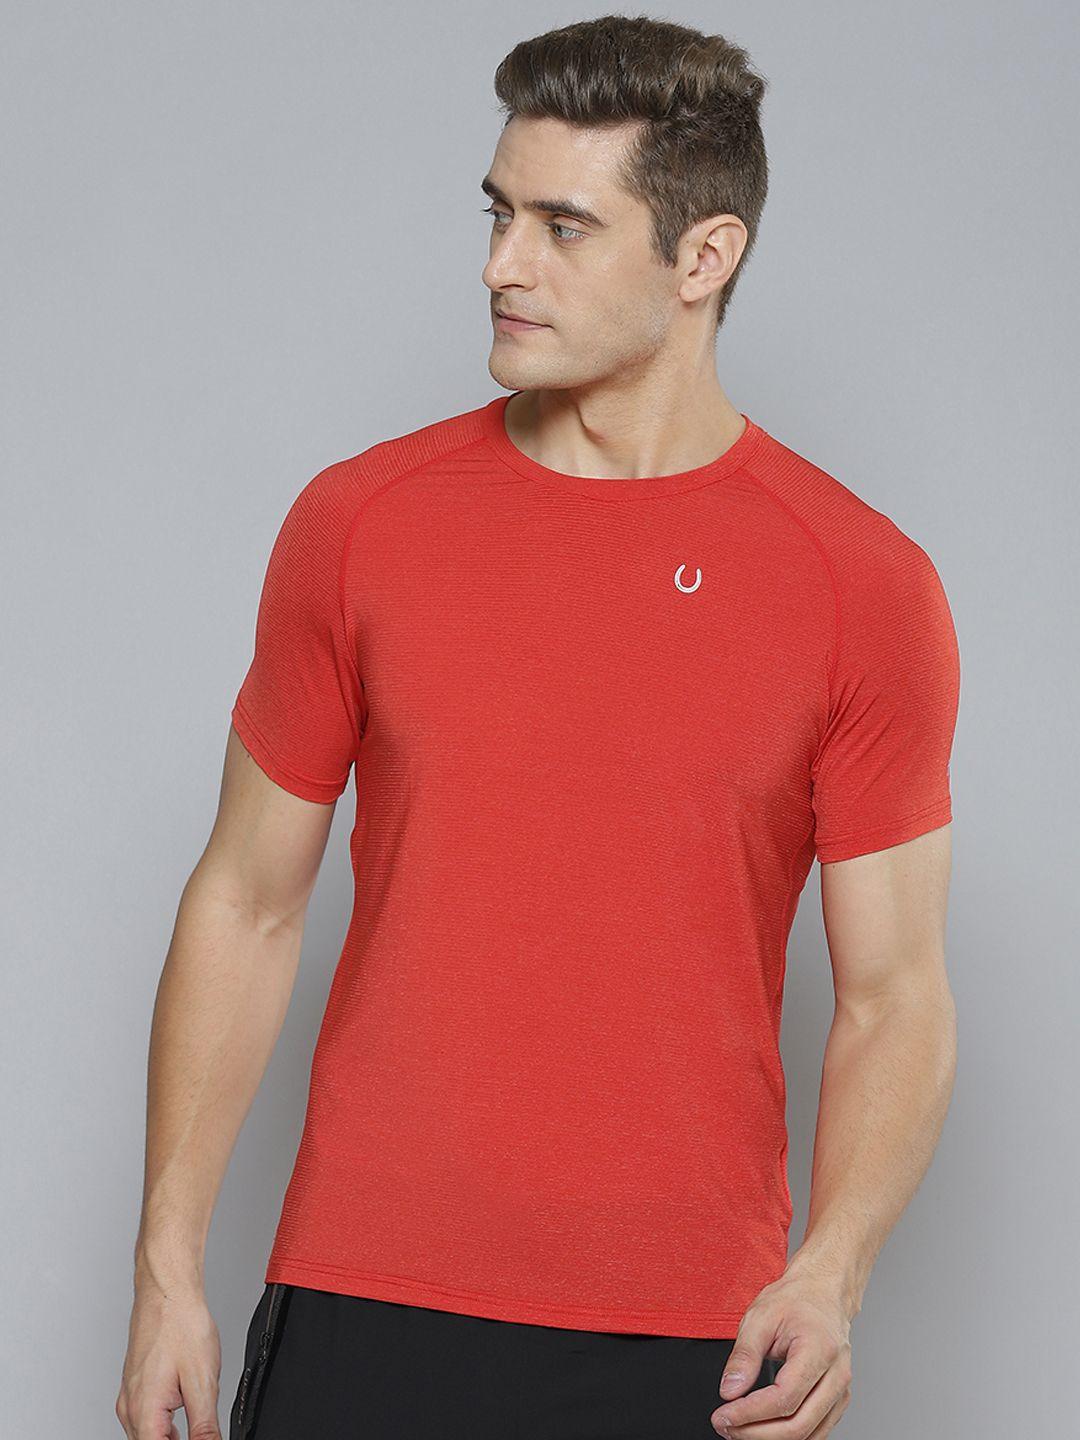 fitkin men red anti odour gym t-shirt